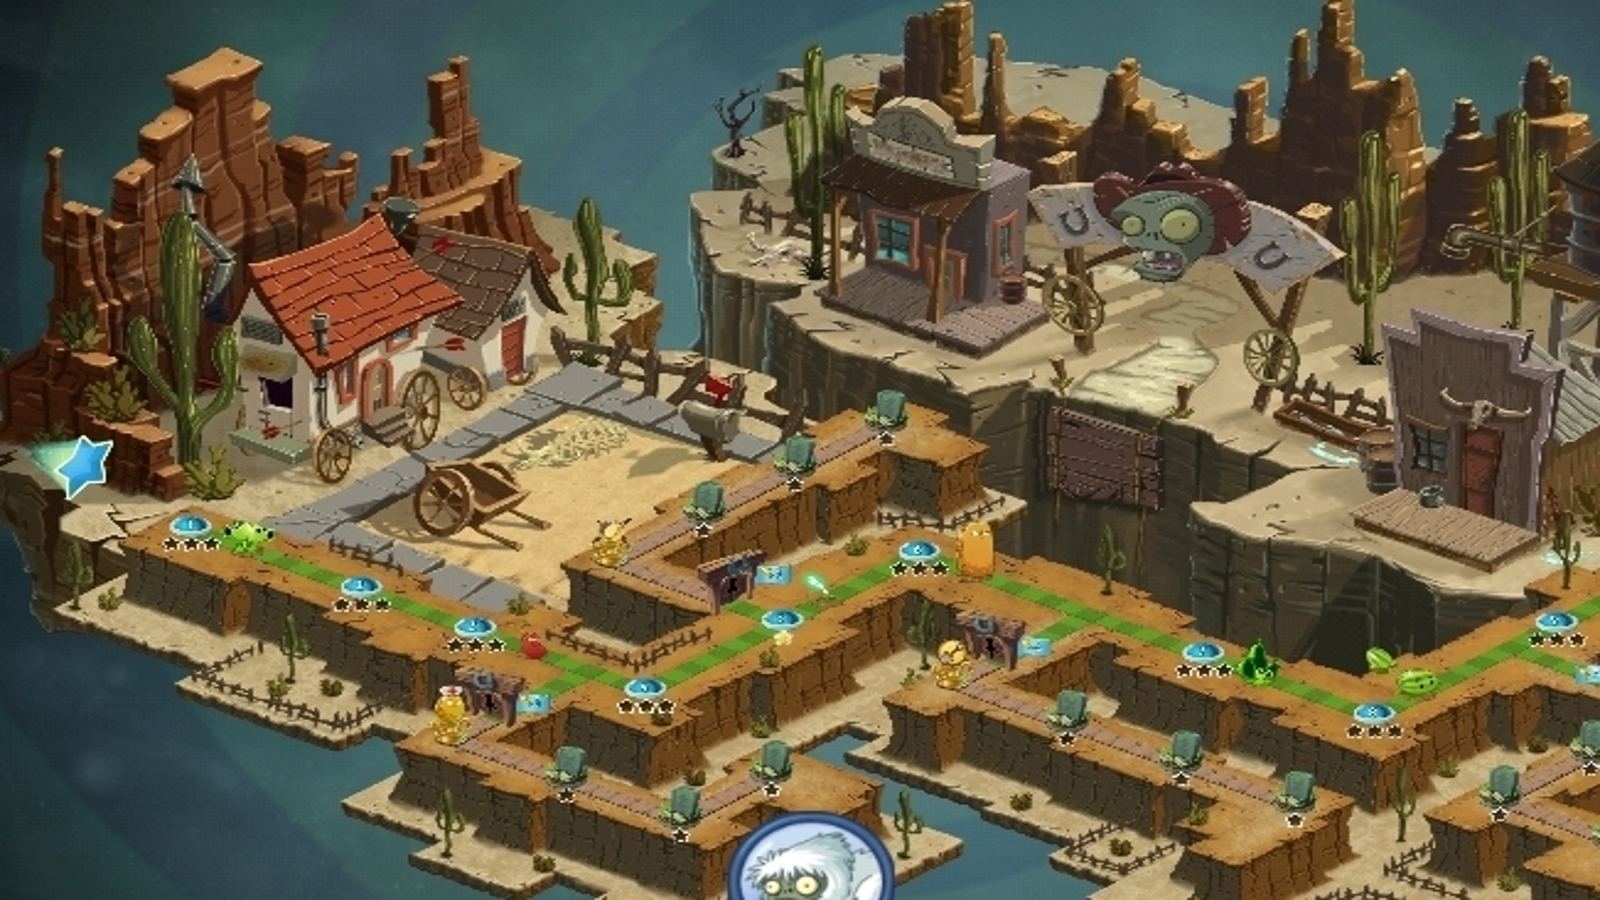 New 'Plants vs. Zombies 2' is instant classic